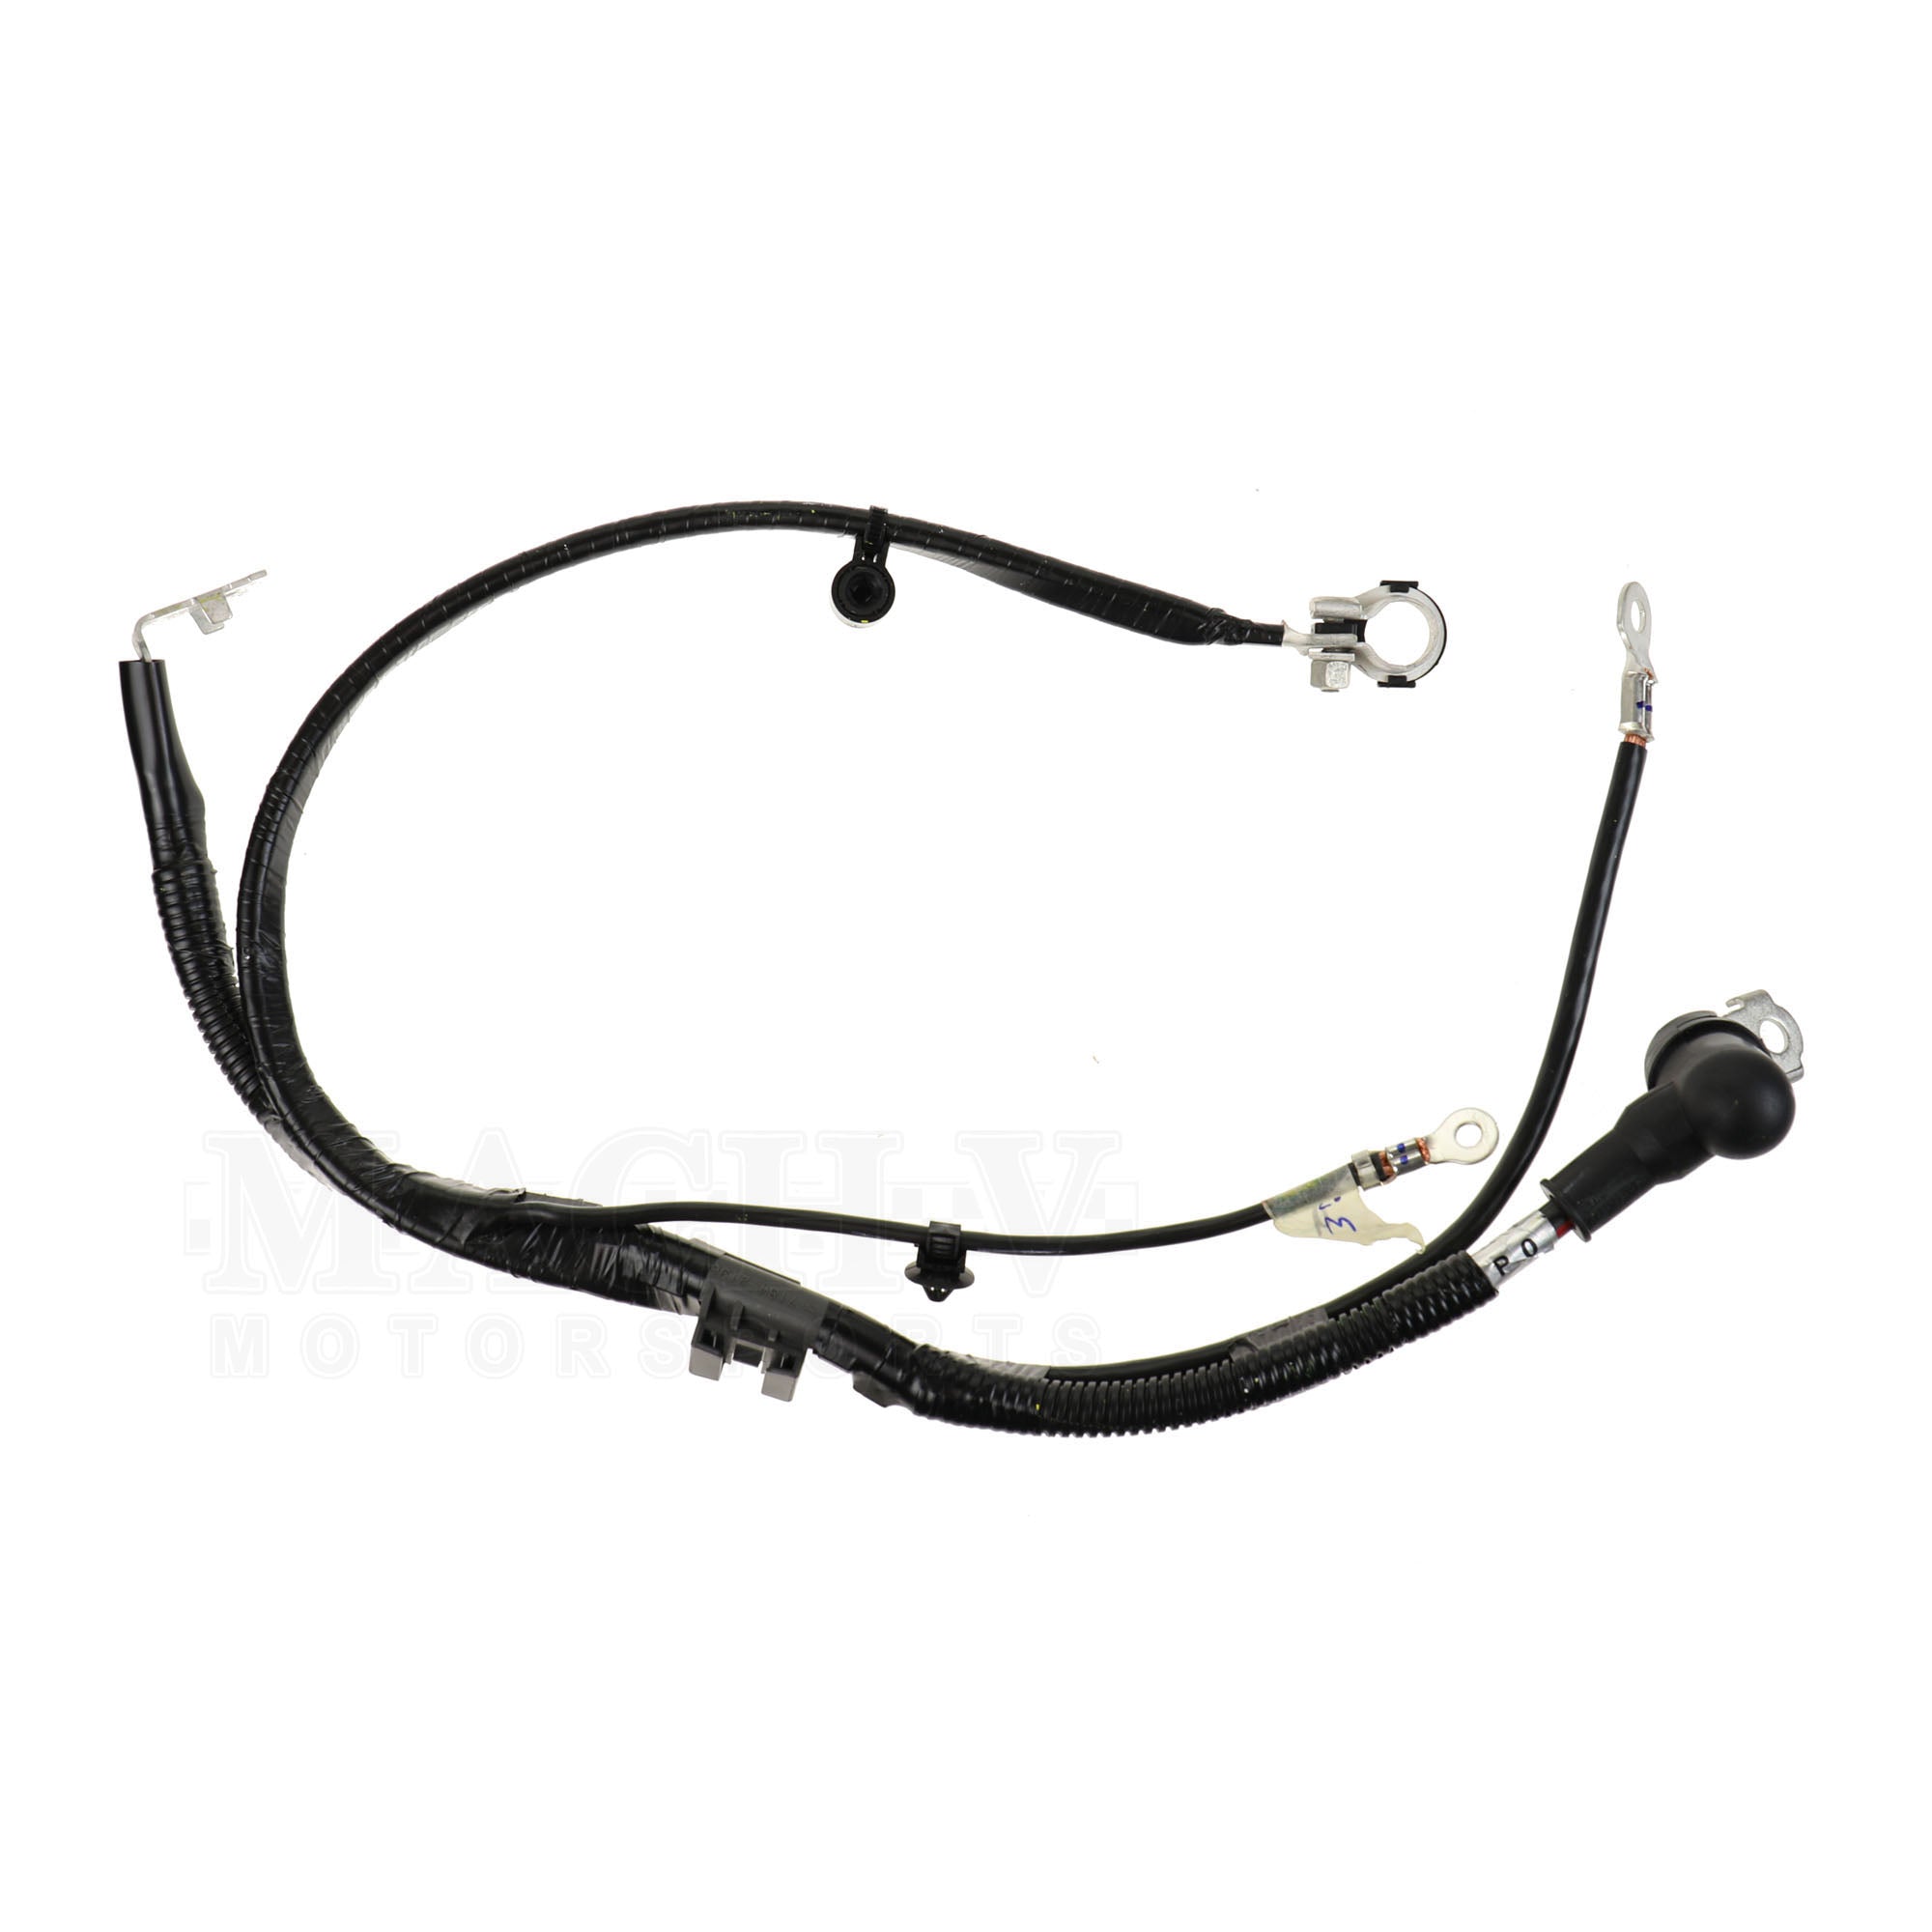 Subaru Battery Cable Assembly 2005-2009 Legacy